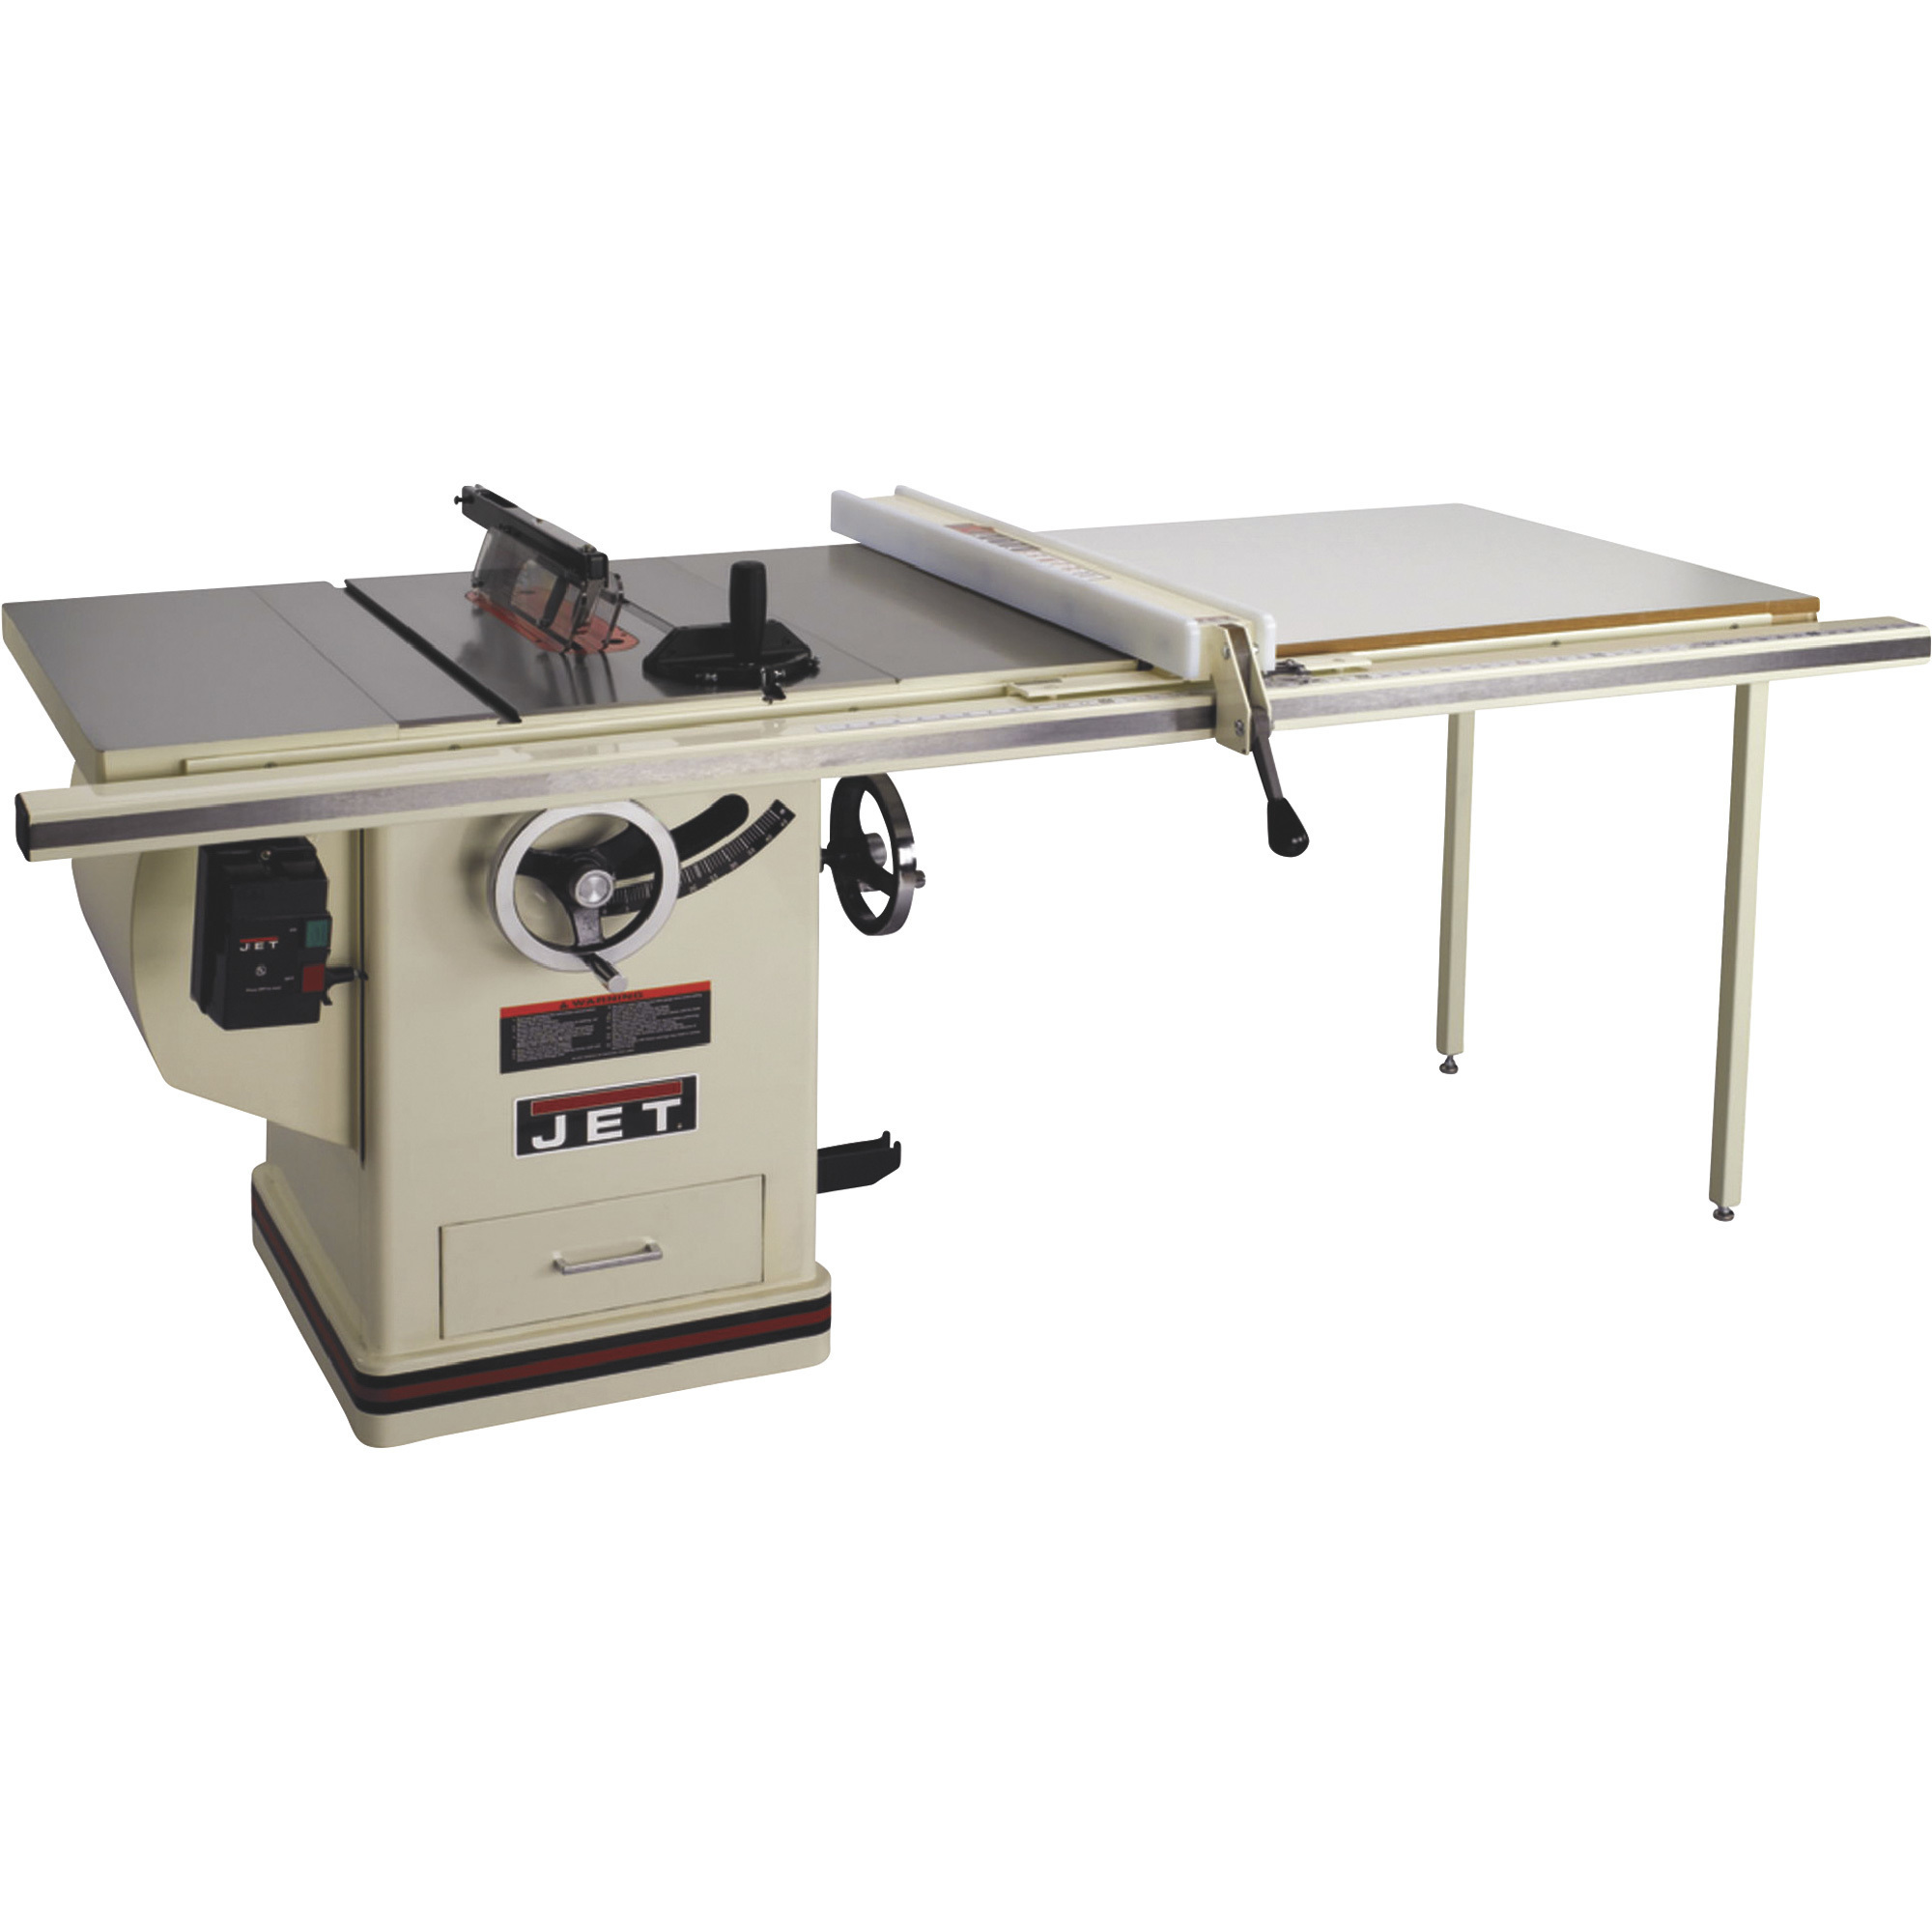 JET 10Inch Deluxe XACTA Table Saw, 5 HP, 50Inch Rip, Model JTAS-10XL50-5/1DX